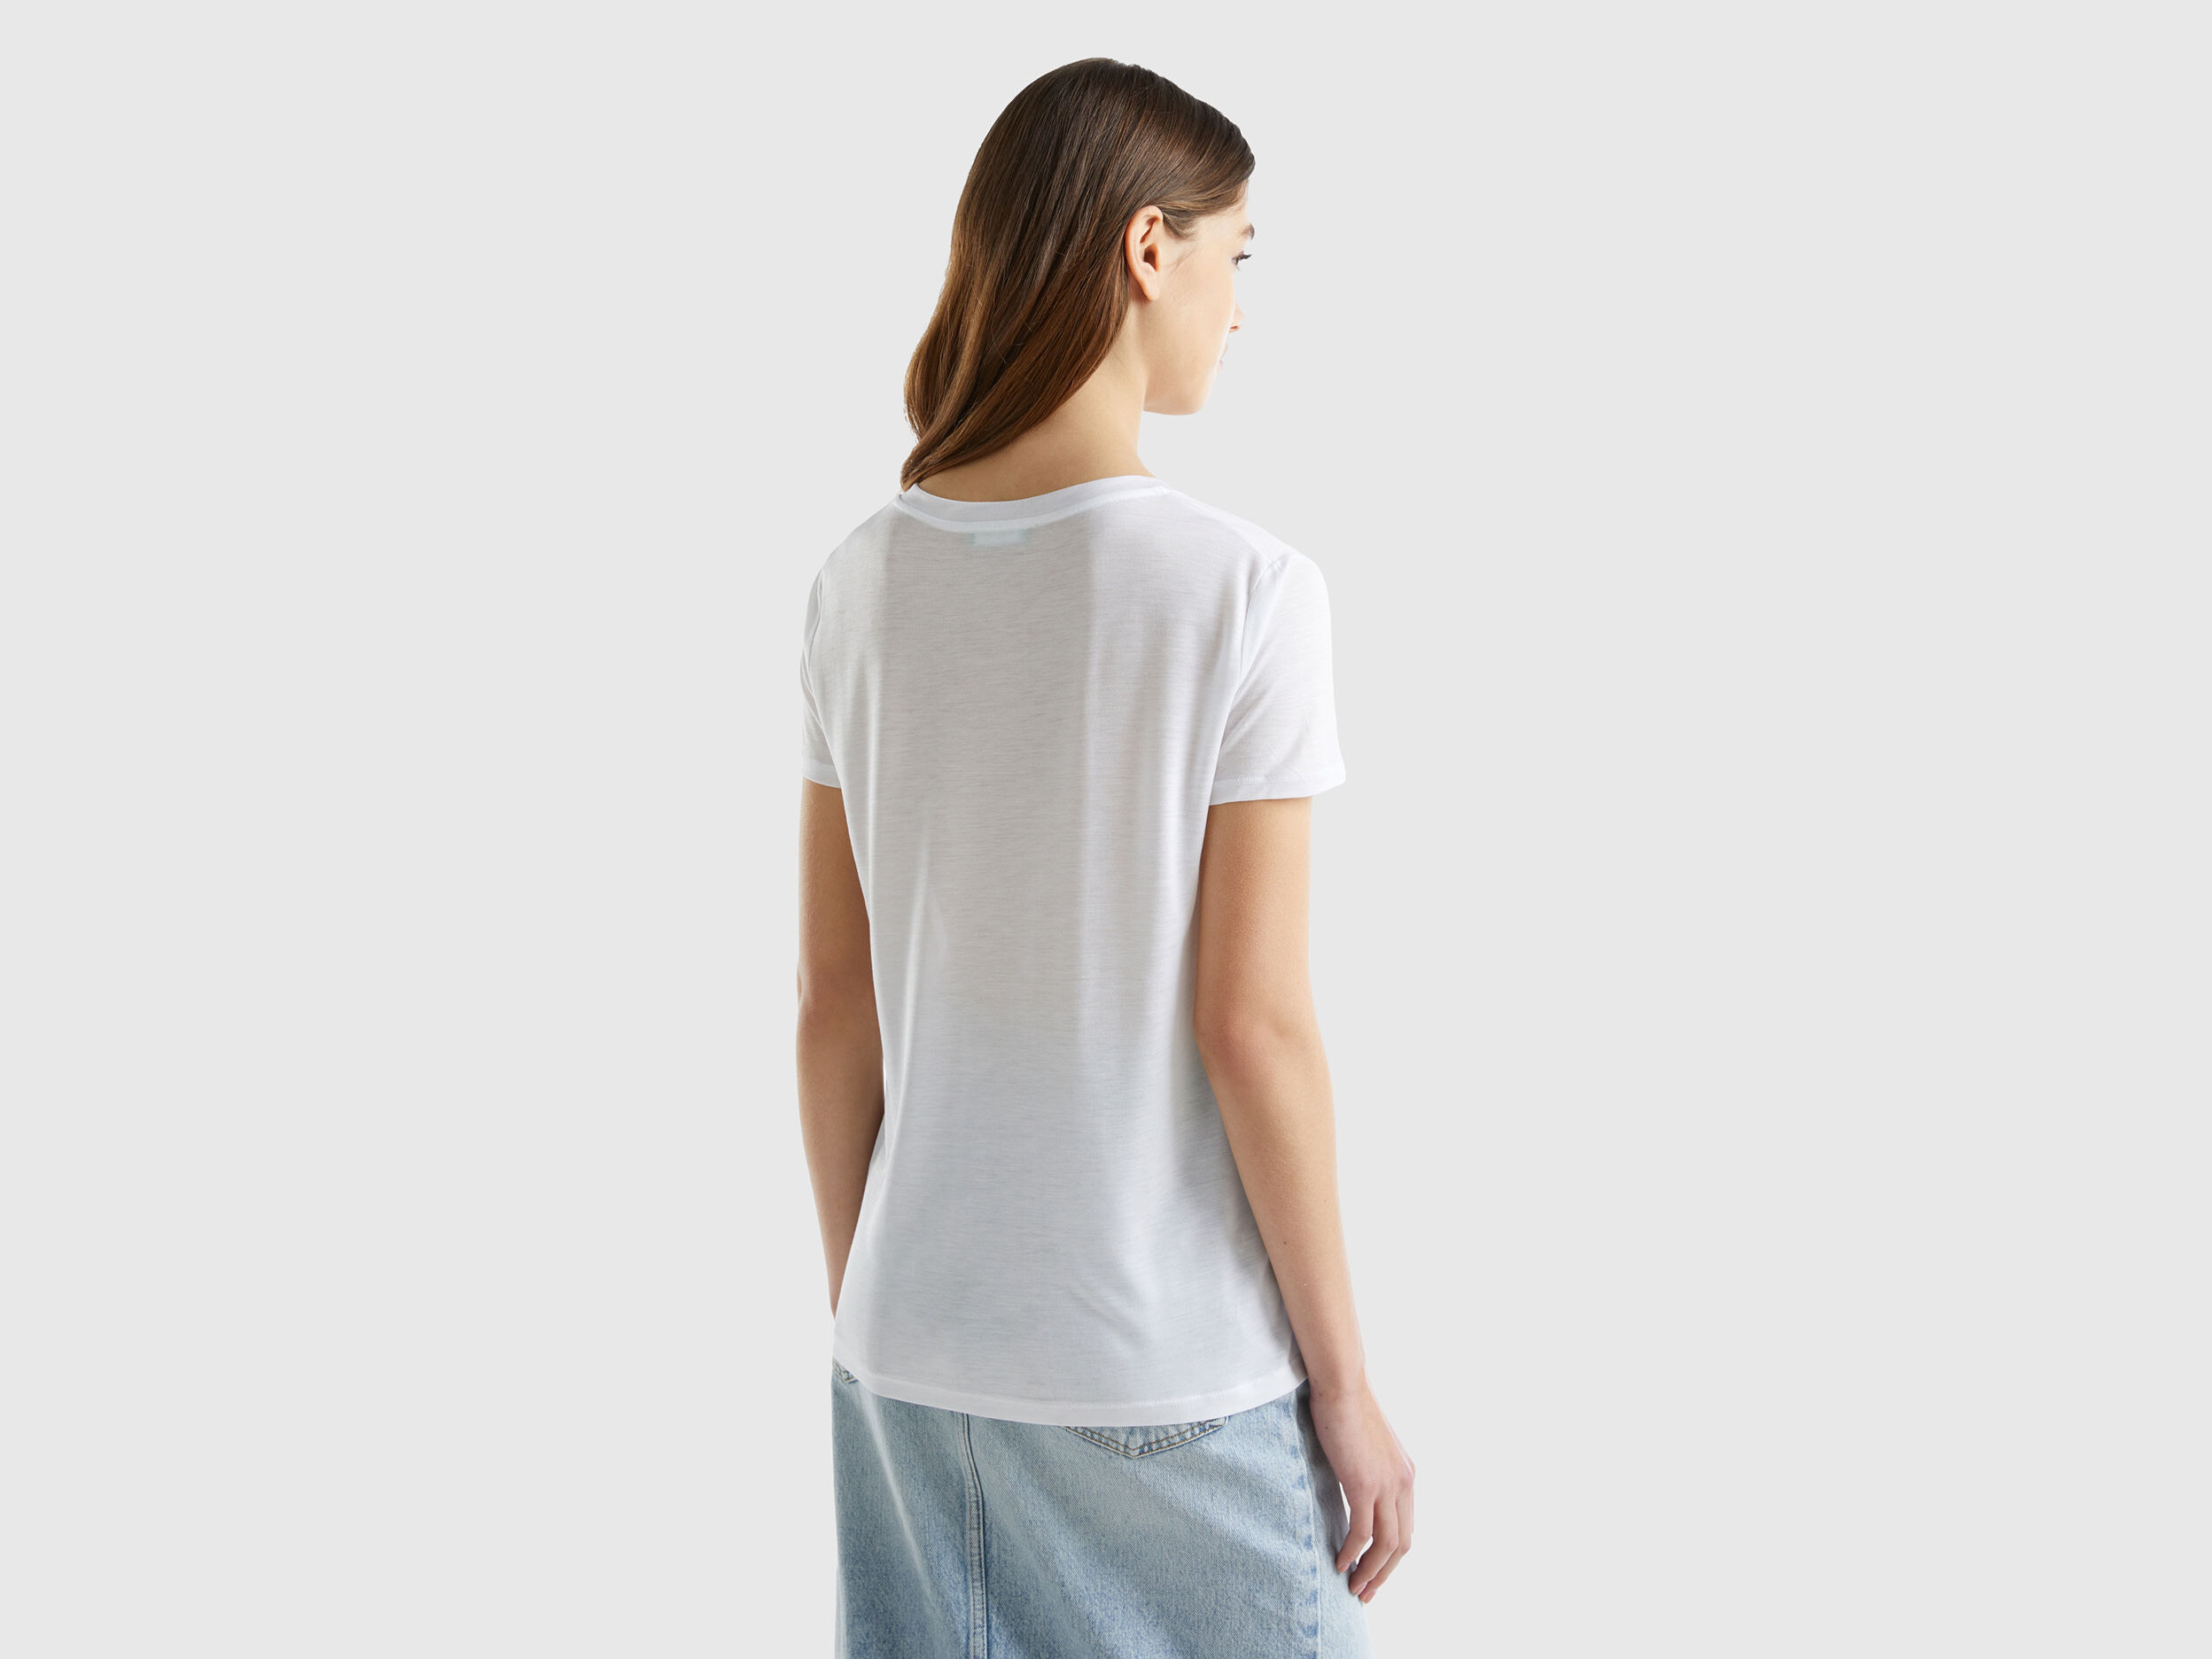 V-neck t-shirt in sustainable viscose